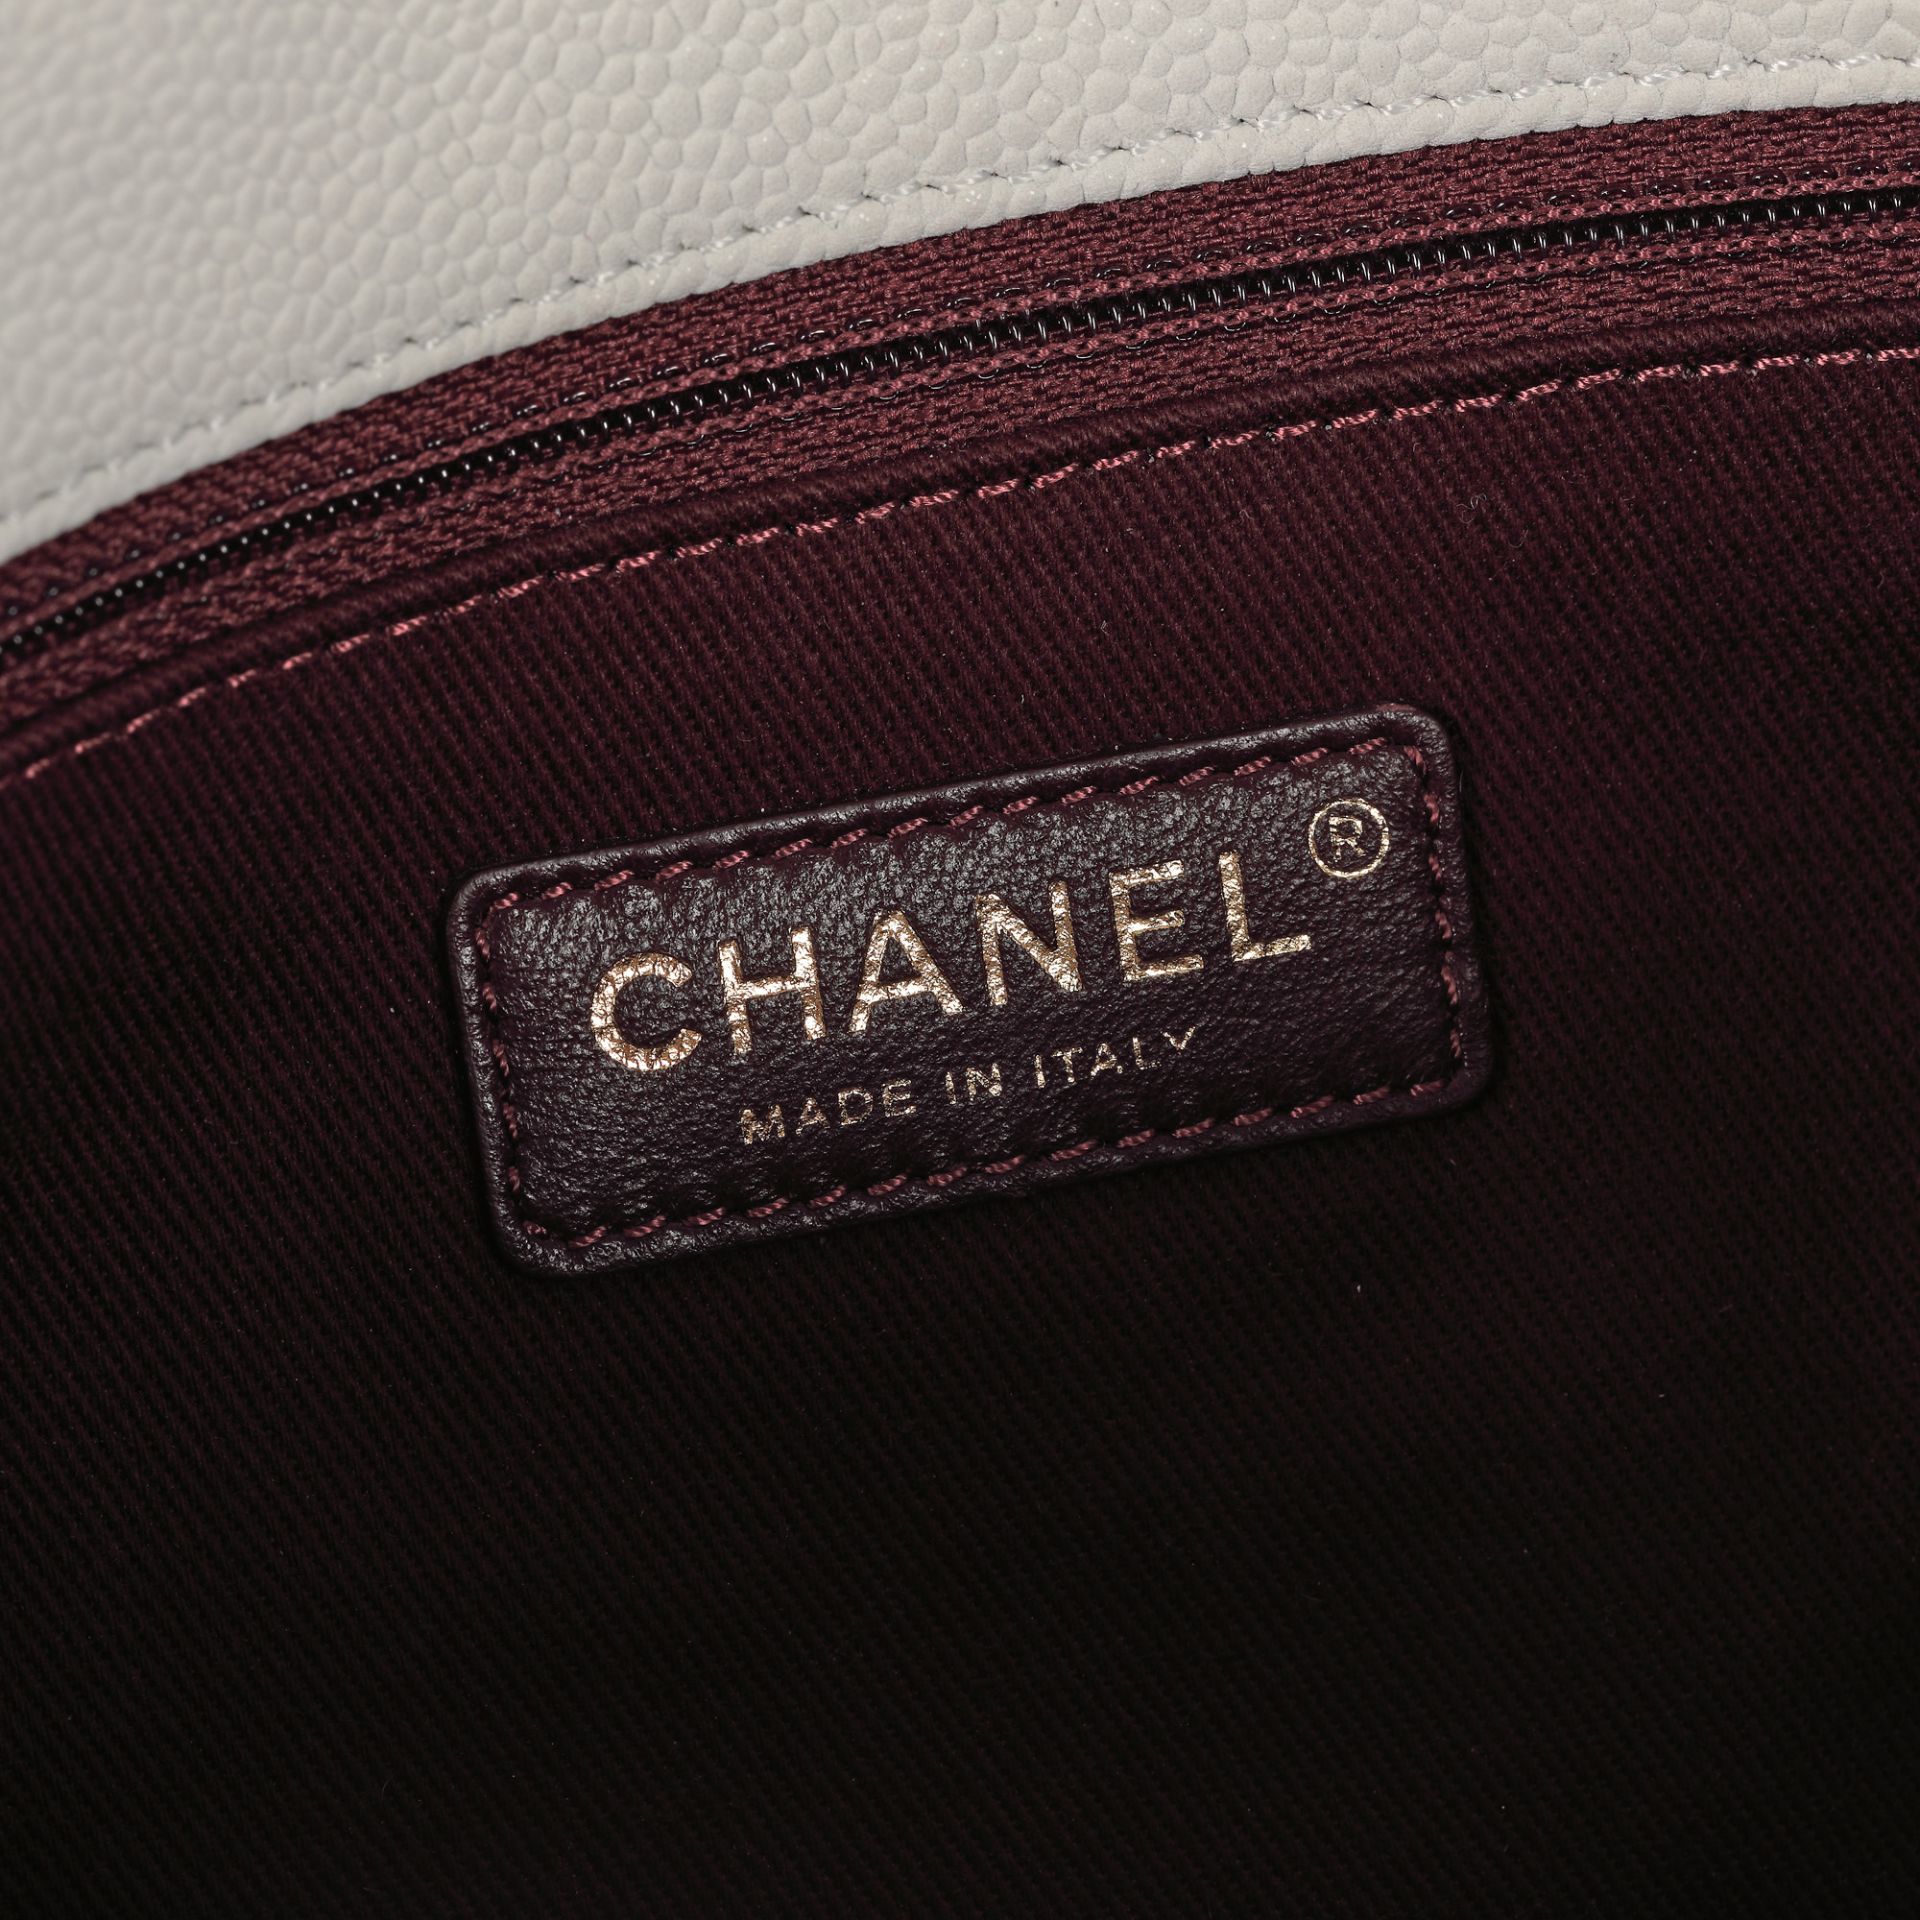 "Globe Trotter Flap" - Chanel bag, quilted leather, white - Image 6 of 6